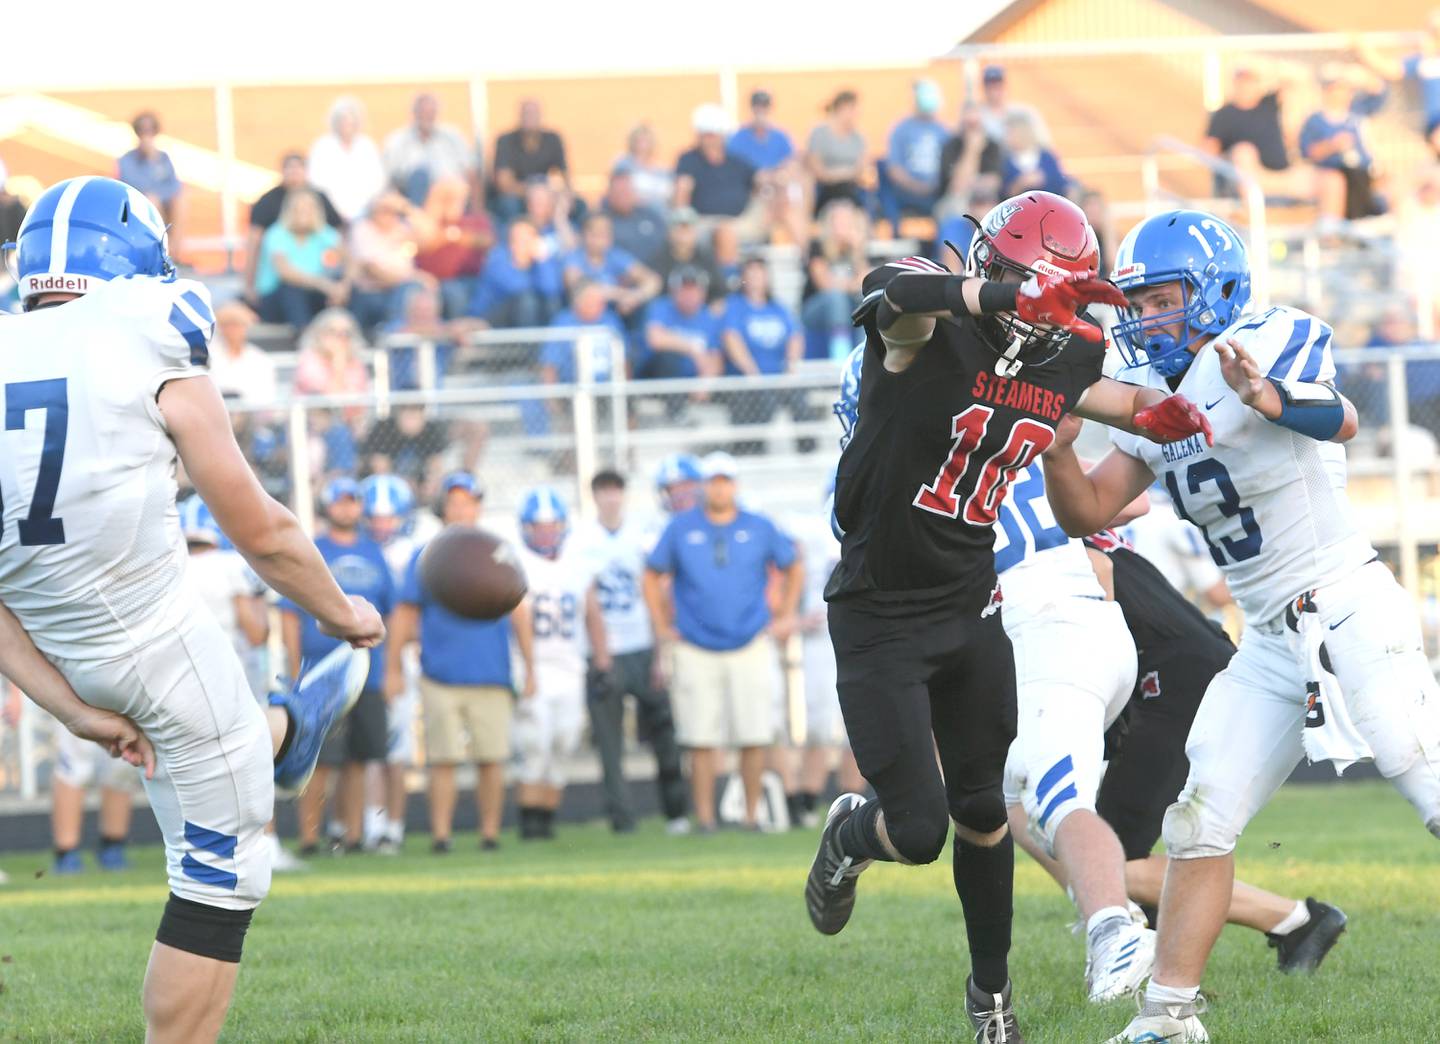 Fulton's Conner Sheridan tries to block a punt against Galena on Friday, Aug. 26, 2022.